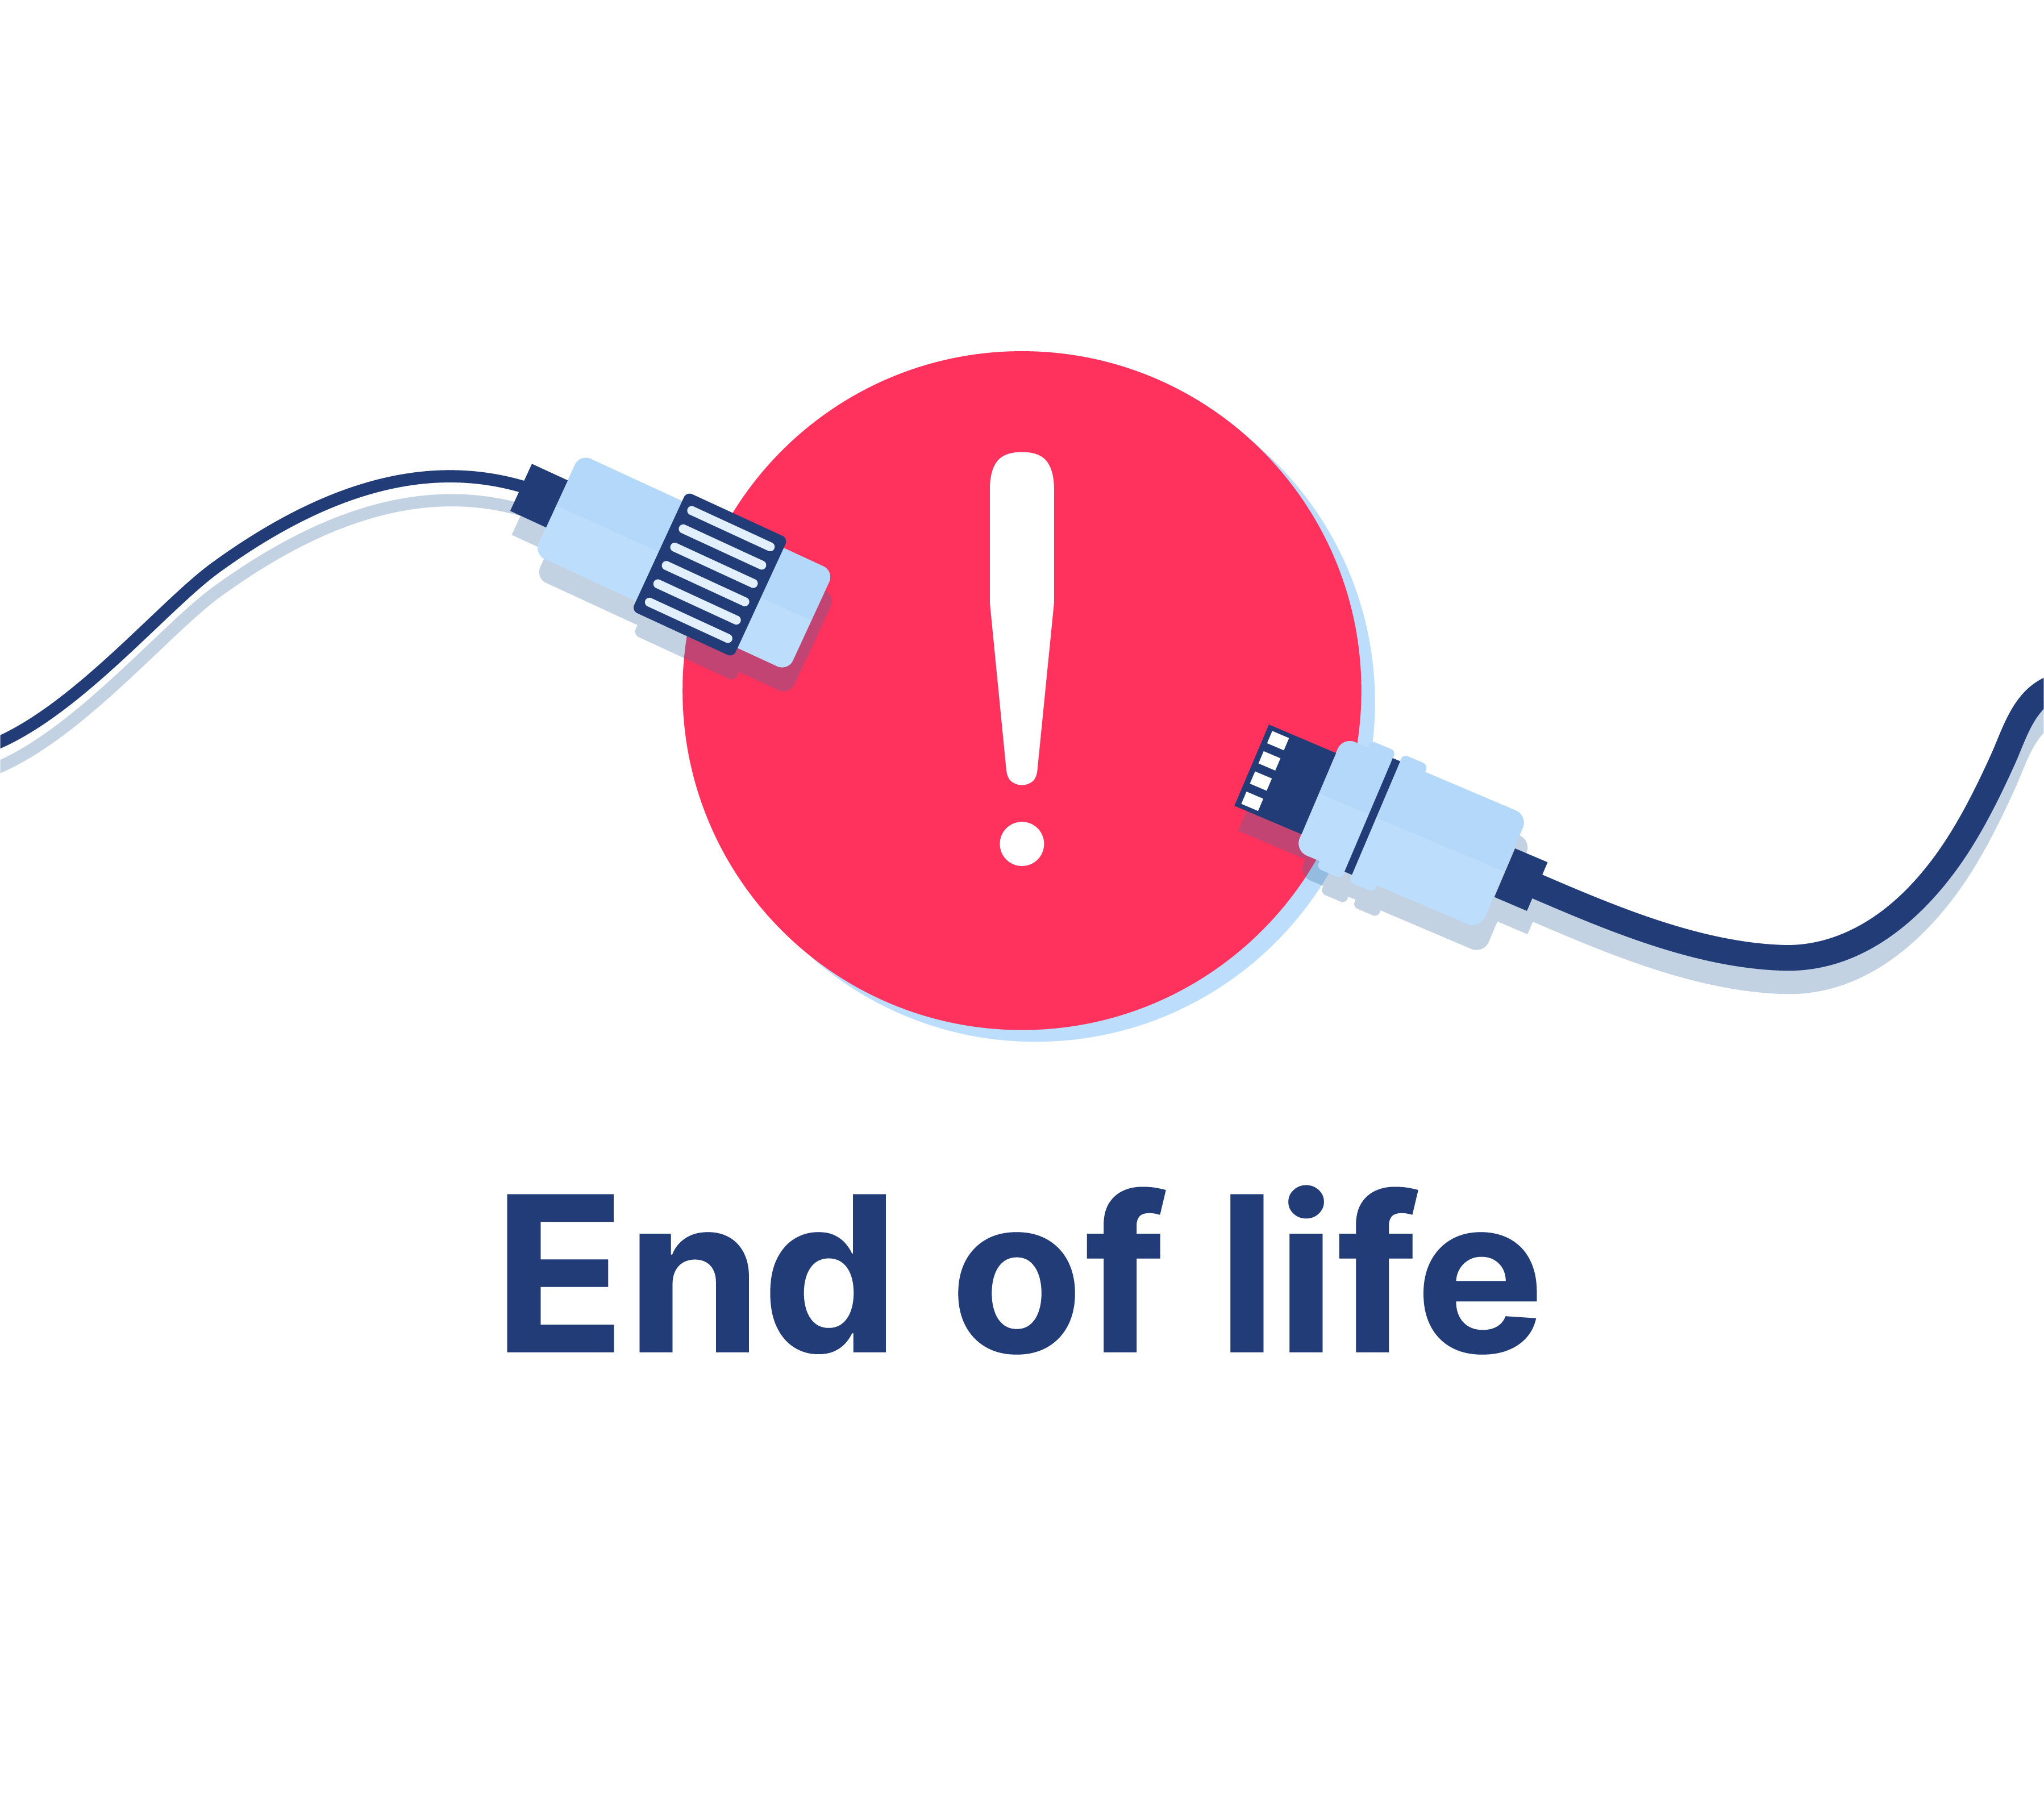 Learn about newly end-of-life (EOL) systems